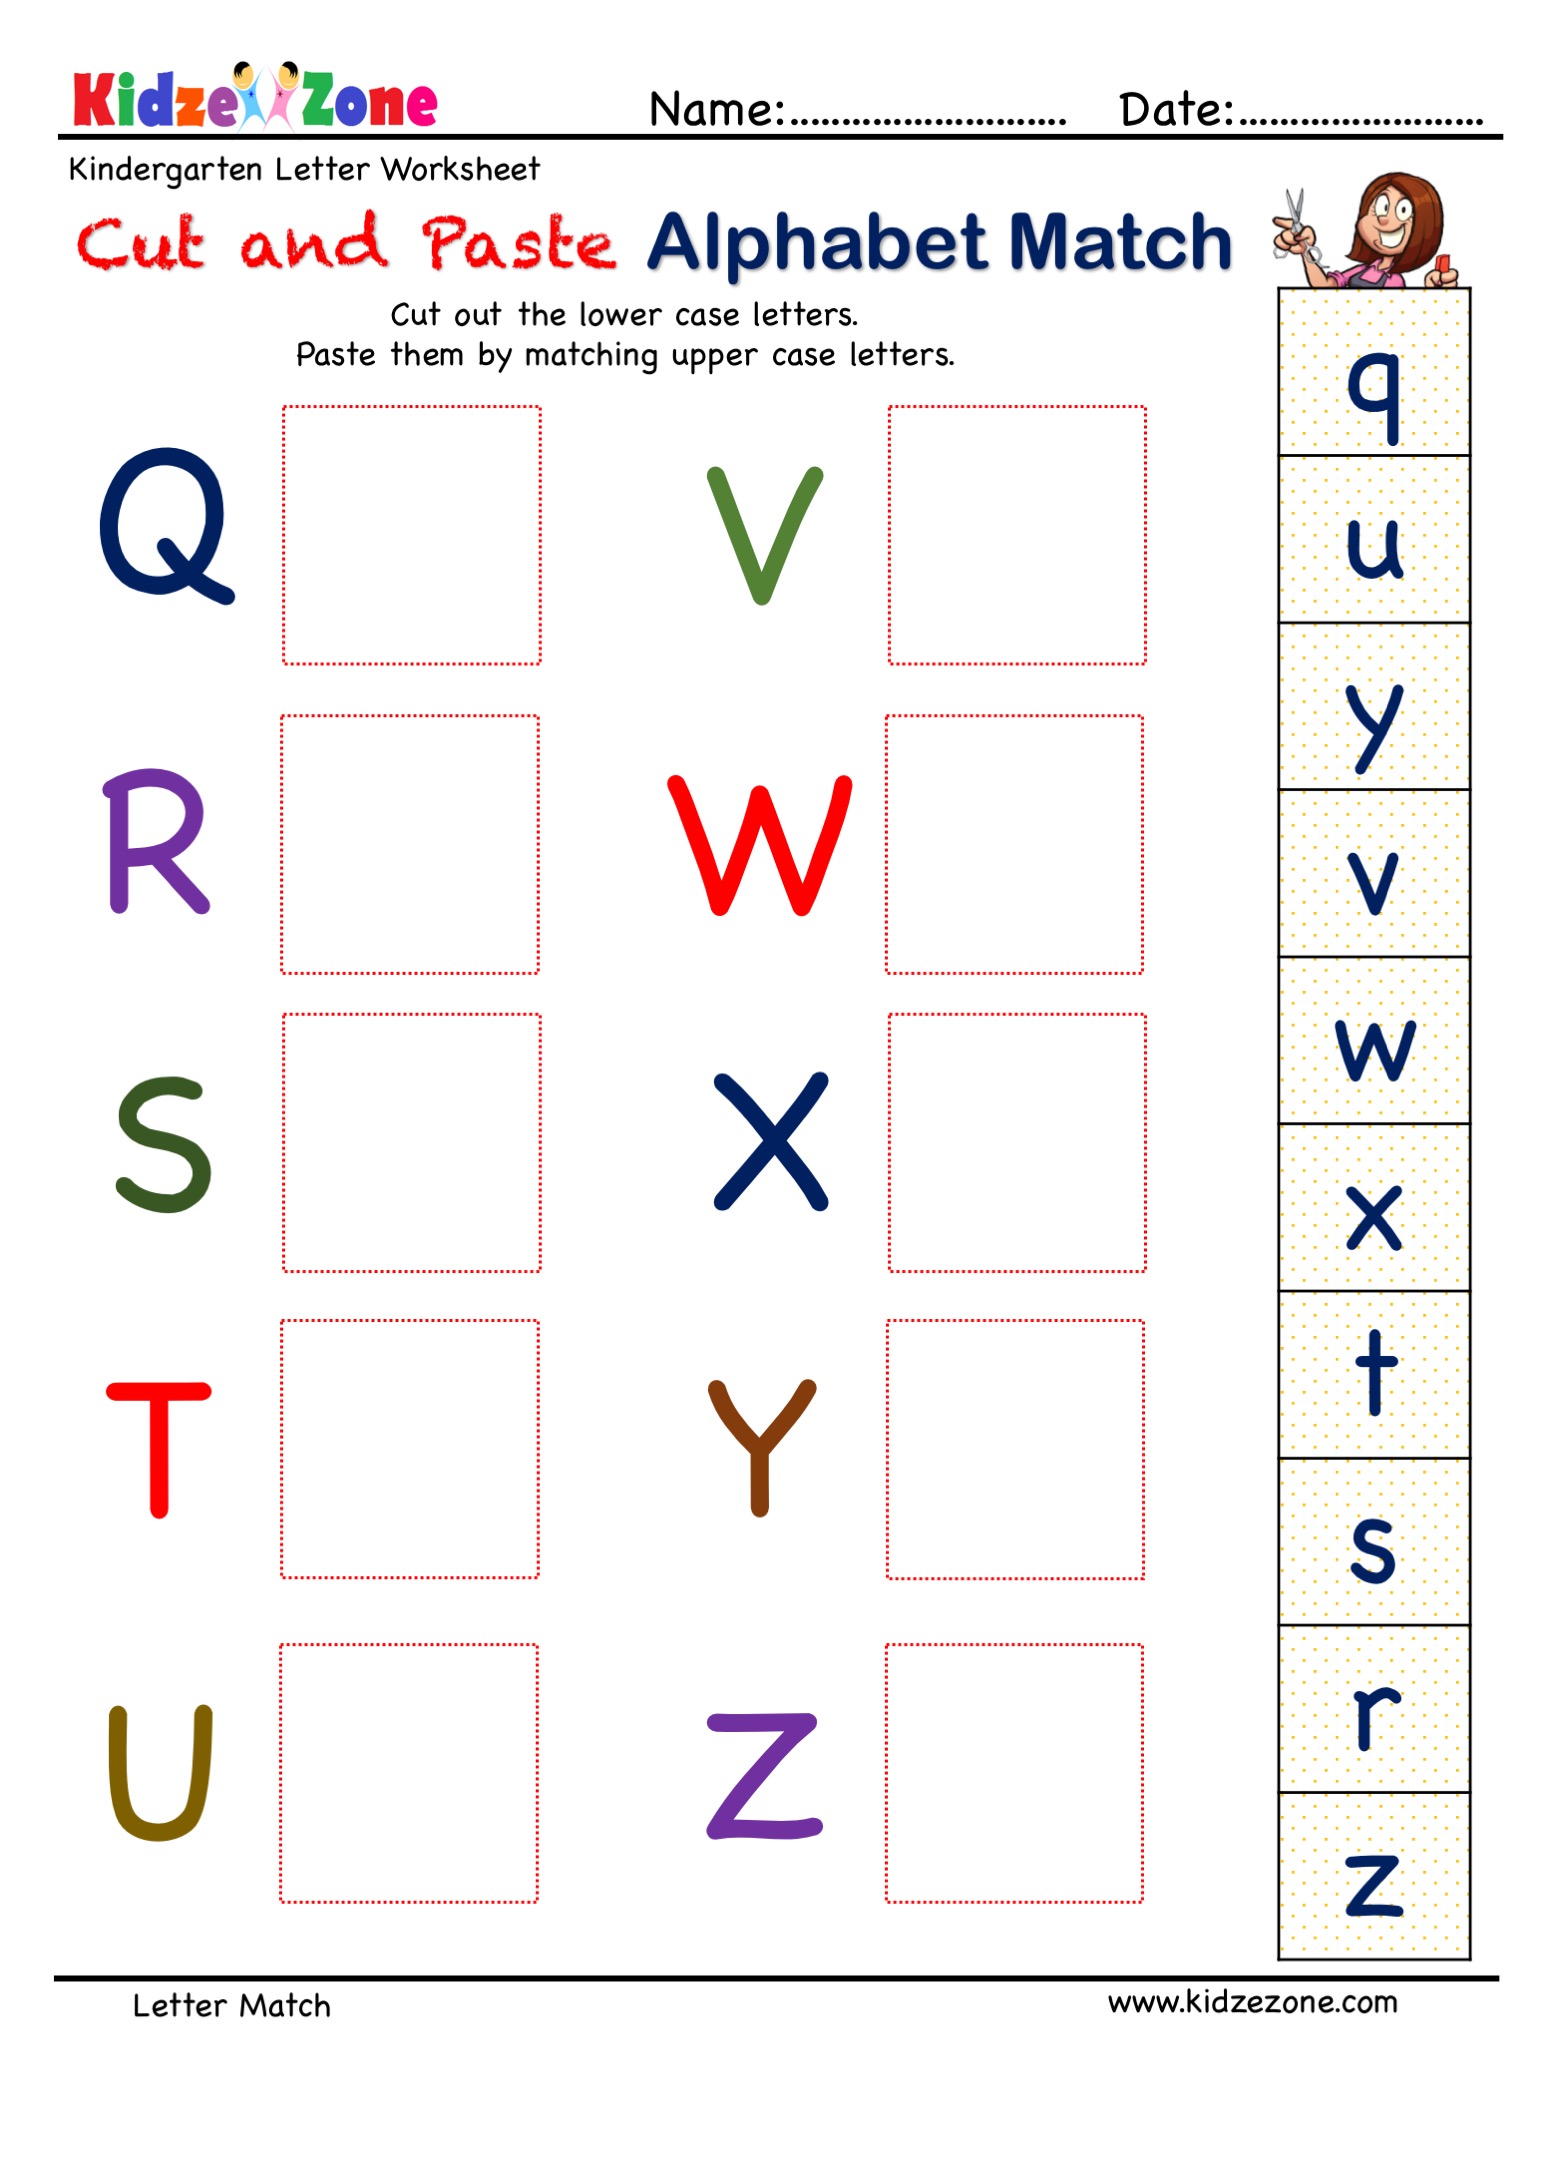 a-z-alphabet-letter-tracing-worksheet-alphabets-capital-letters-tracing